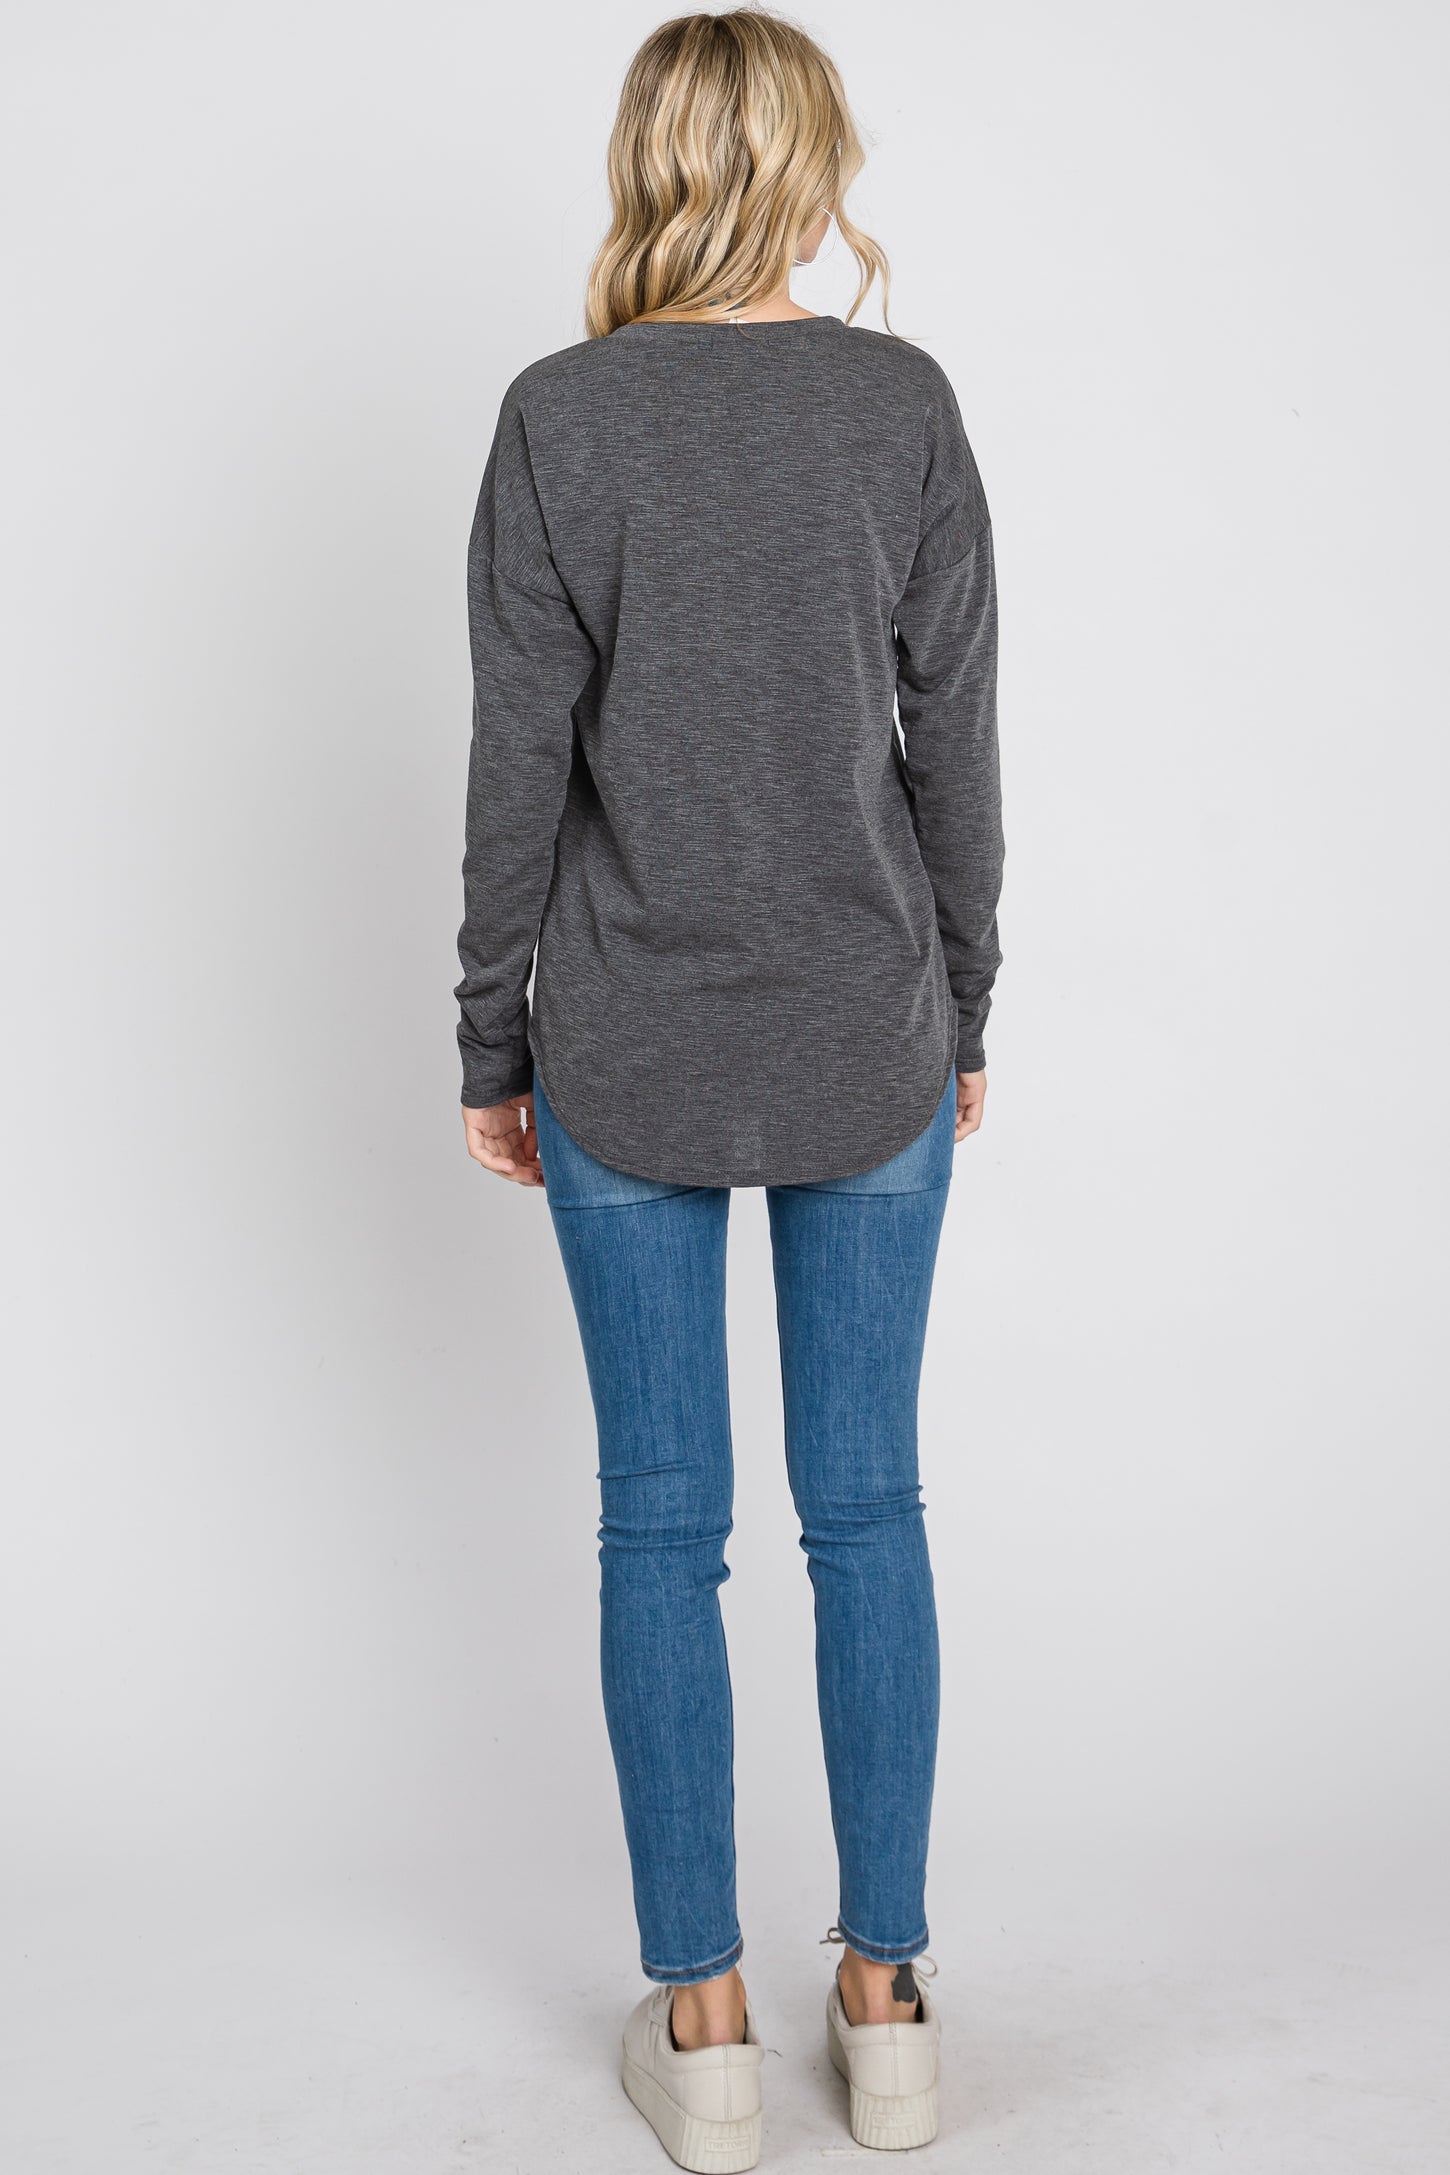 Charcoal Mixed Knit Round Hem Top